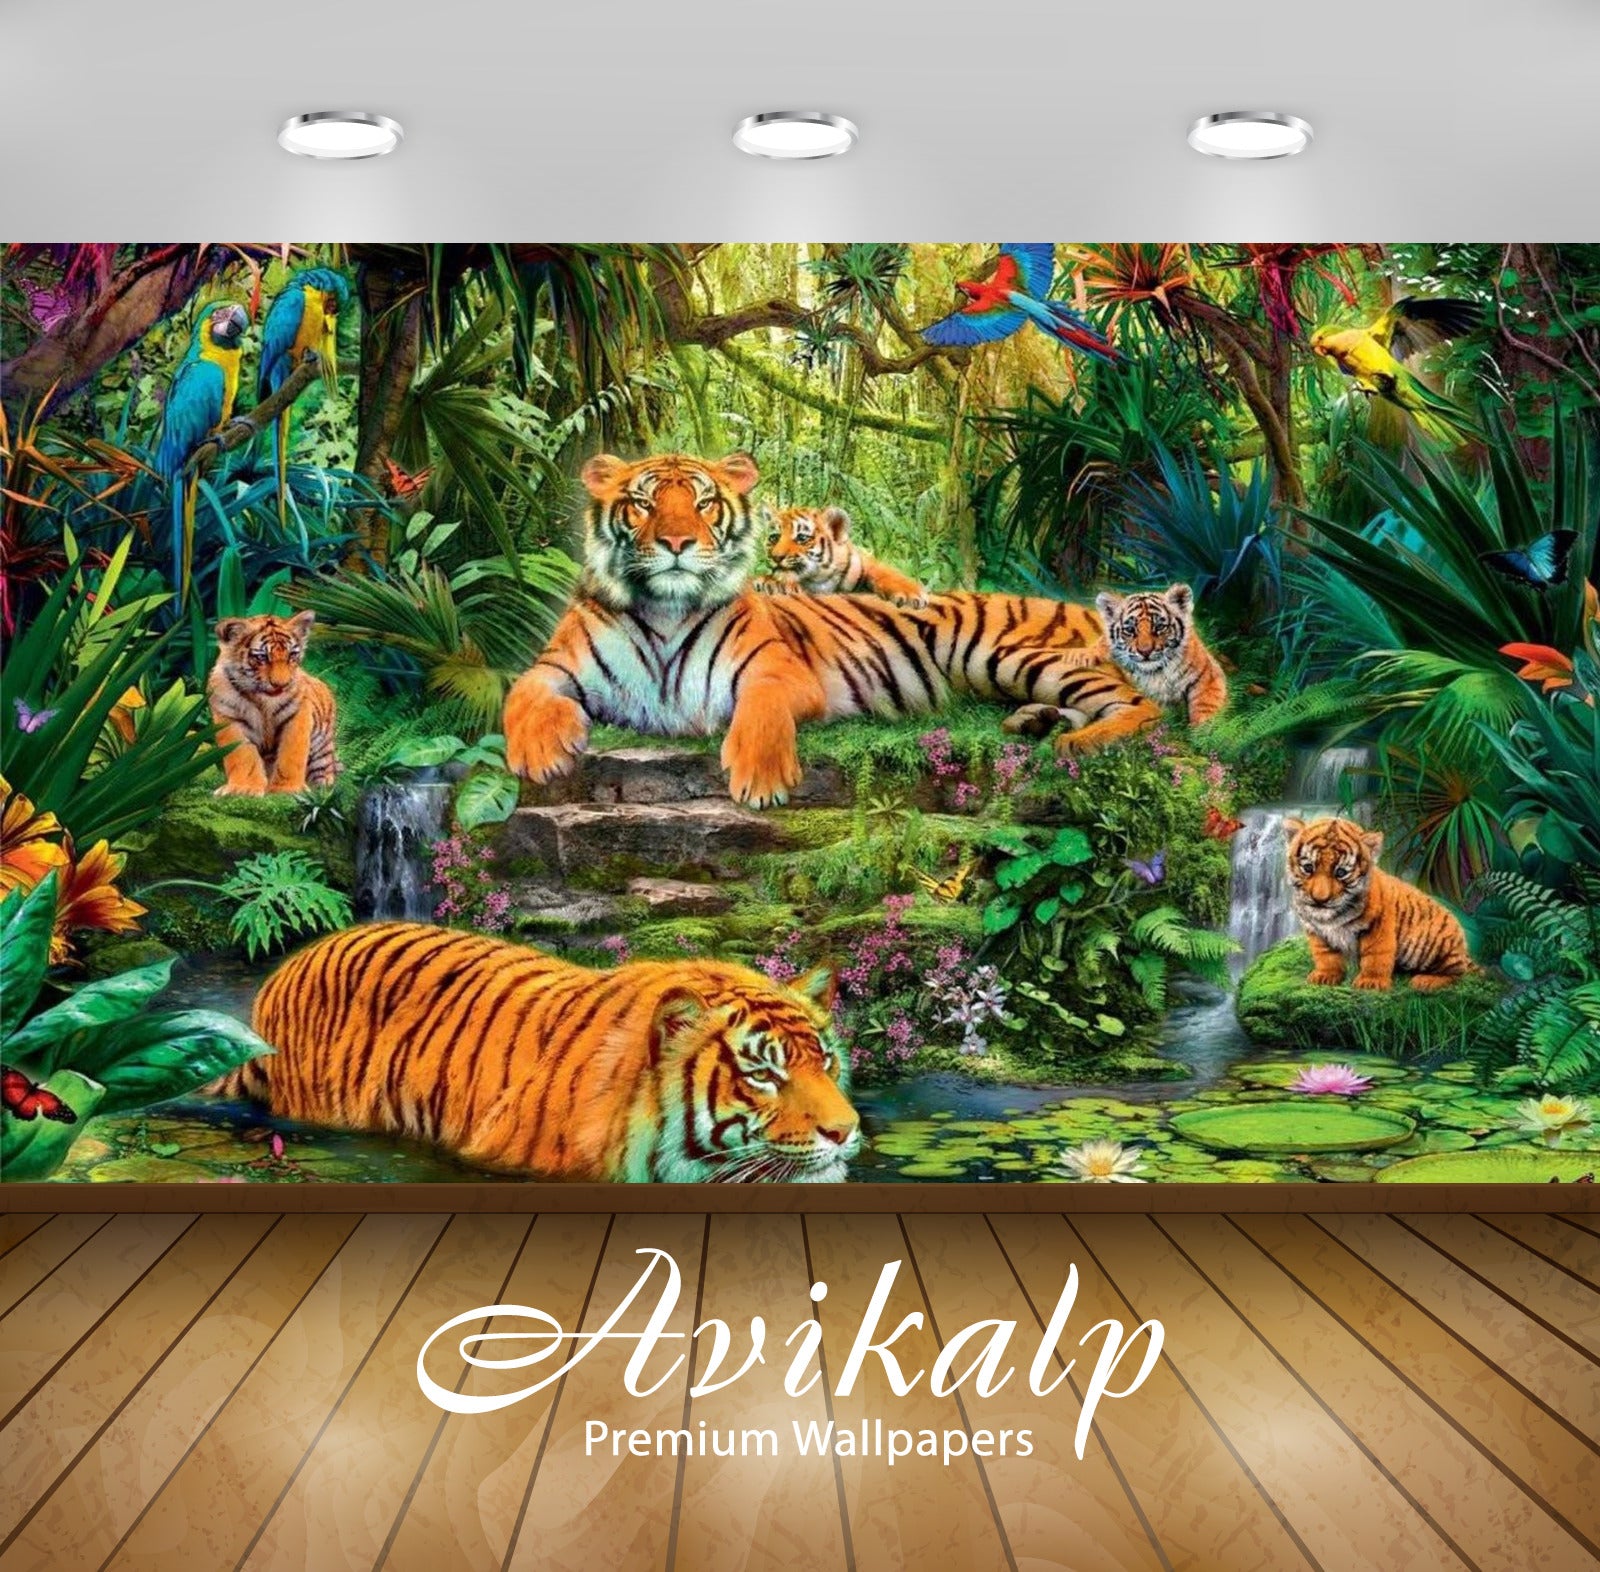 Avikalp Exclusive Awi2031 Animal Kingdom Jungle Tigers Birds  Full HD Wallpapers for Living room, Ha